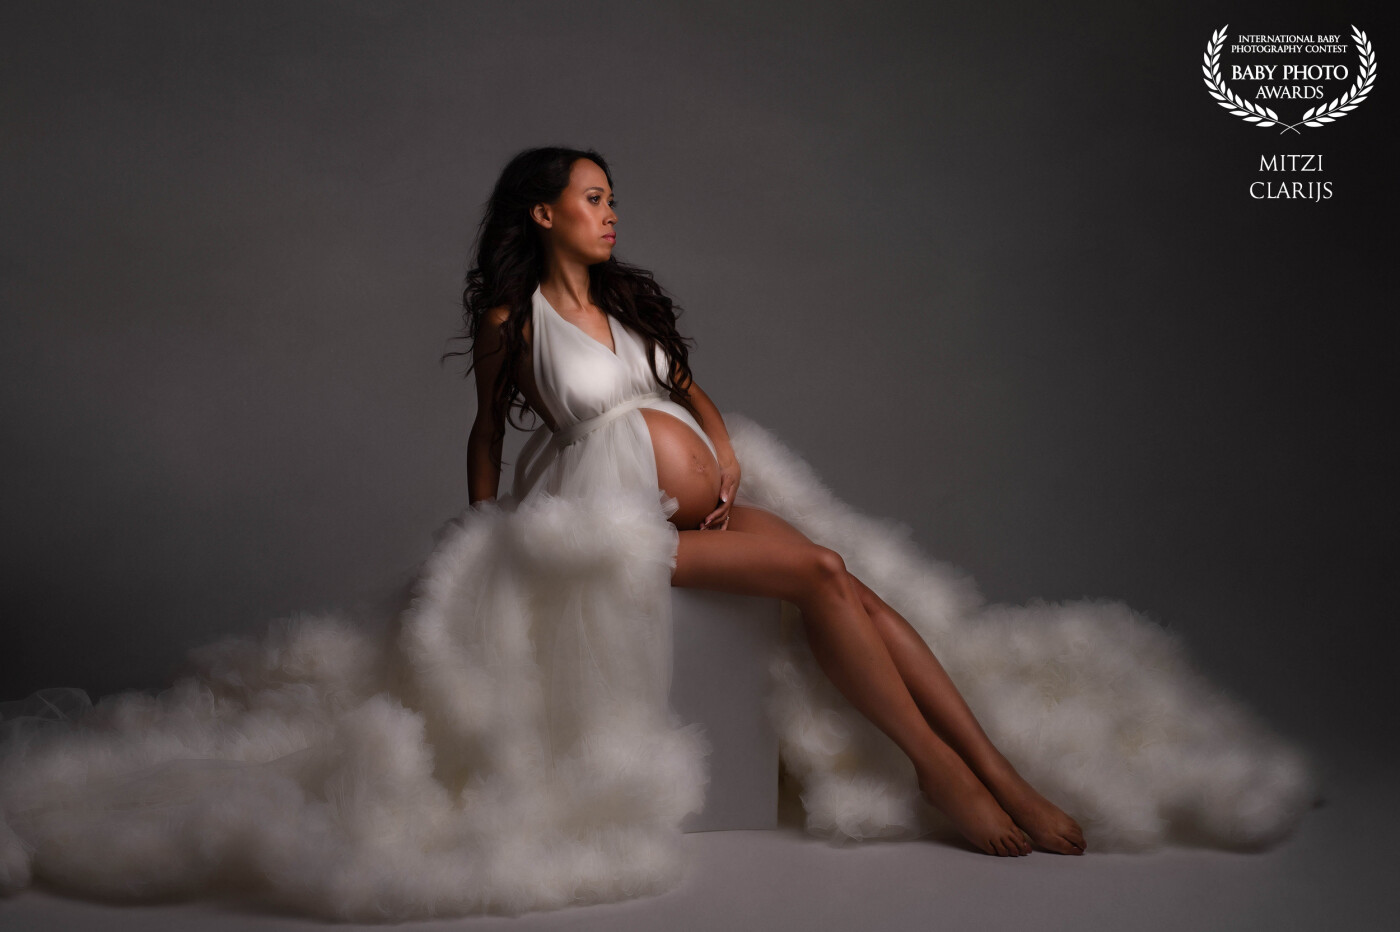 This mom really rocked this dress.. And her shoot! I mean, look at her